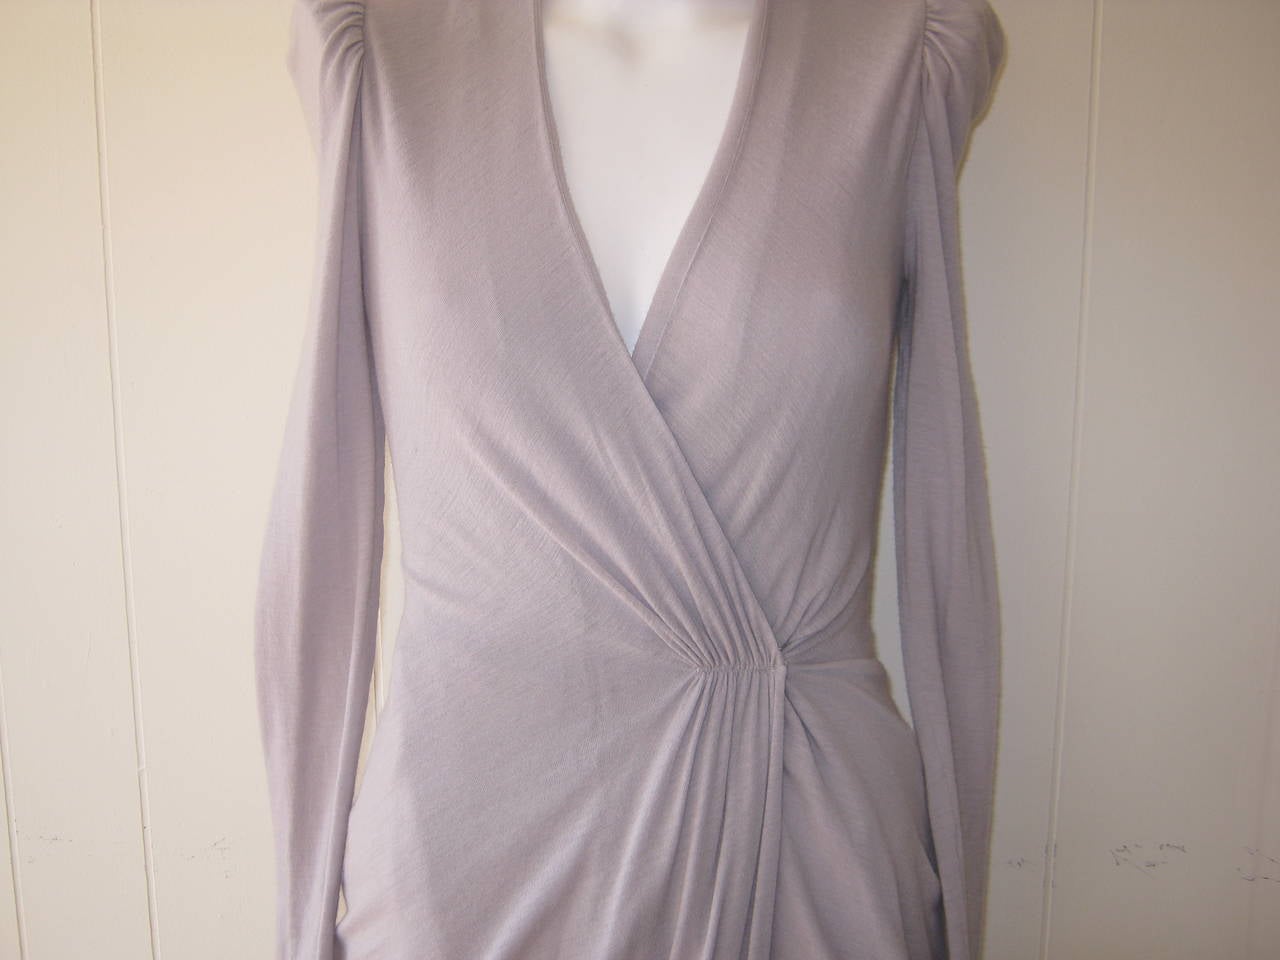 Grey with a hint of purple, this deep v-necked, long sleeved light wool with 5% lycra dress features a wrap front with press stud and tie fastening, draped sides and gathered detailing on the shoulders. This is a very comfortable and elegant